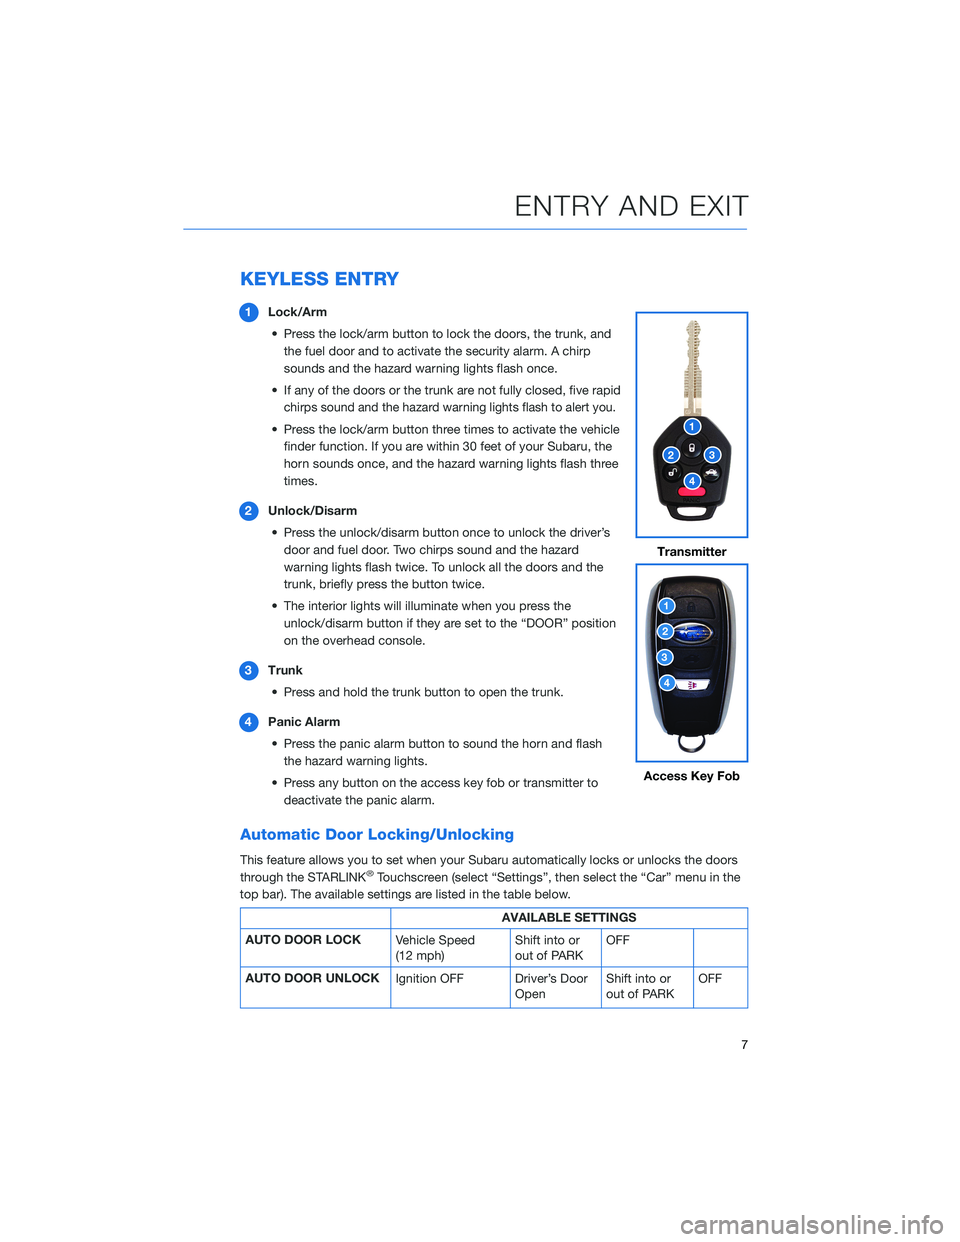 SUBARU LEGACY 2022  Getting Started Guide KEYLESS ENTRY
1Lock/Arm
• Press the lock/arm button to lock the doors, the trunk, and
the fuel door and to activate the security alarm. A chirp
sounds and the hazard warning lights flash once.
• I